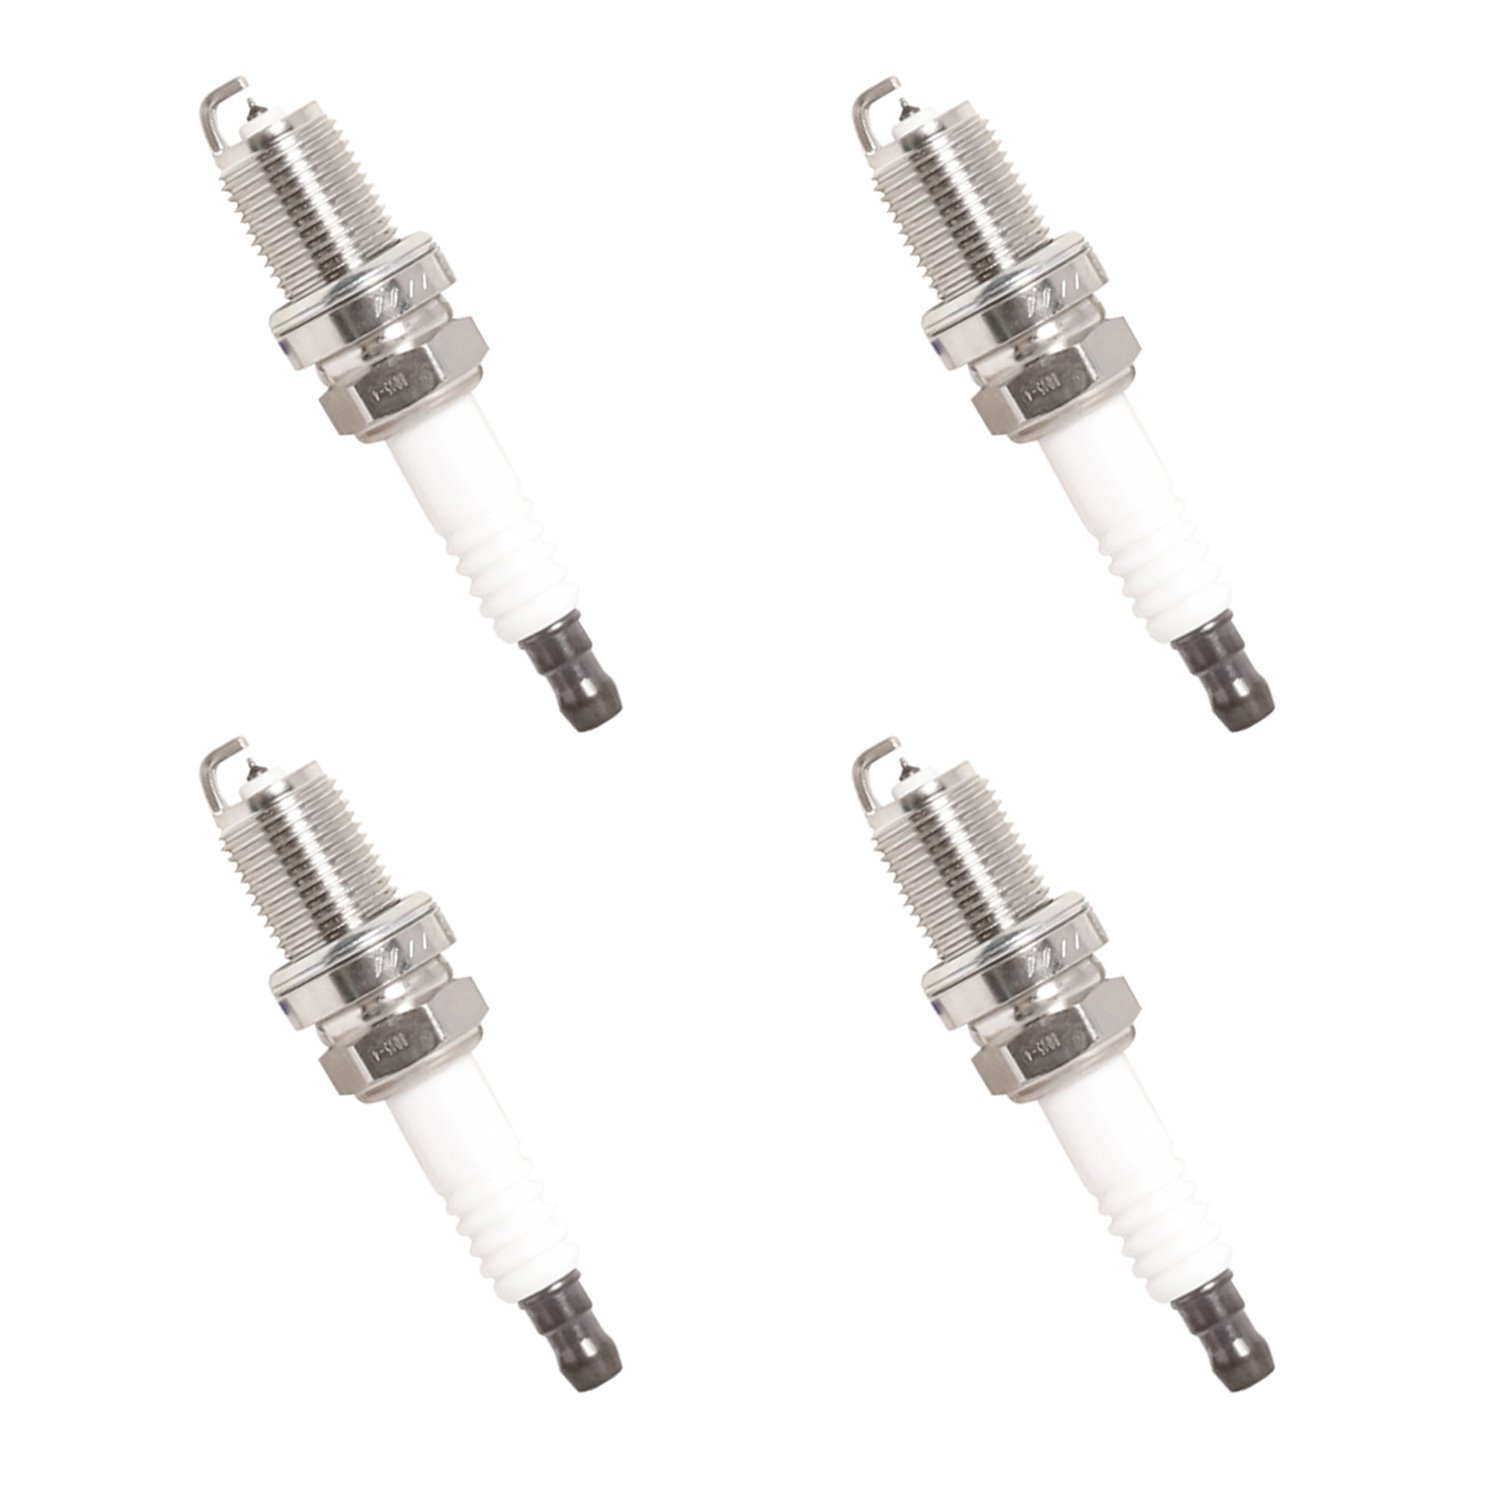 OE Replacement Spark Plug Set for Toyota Corolla,